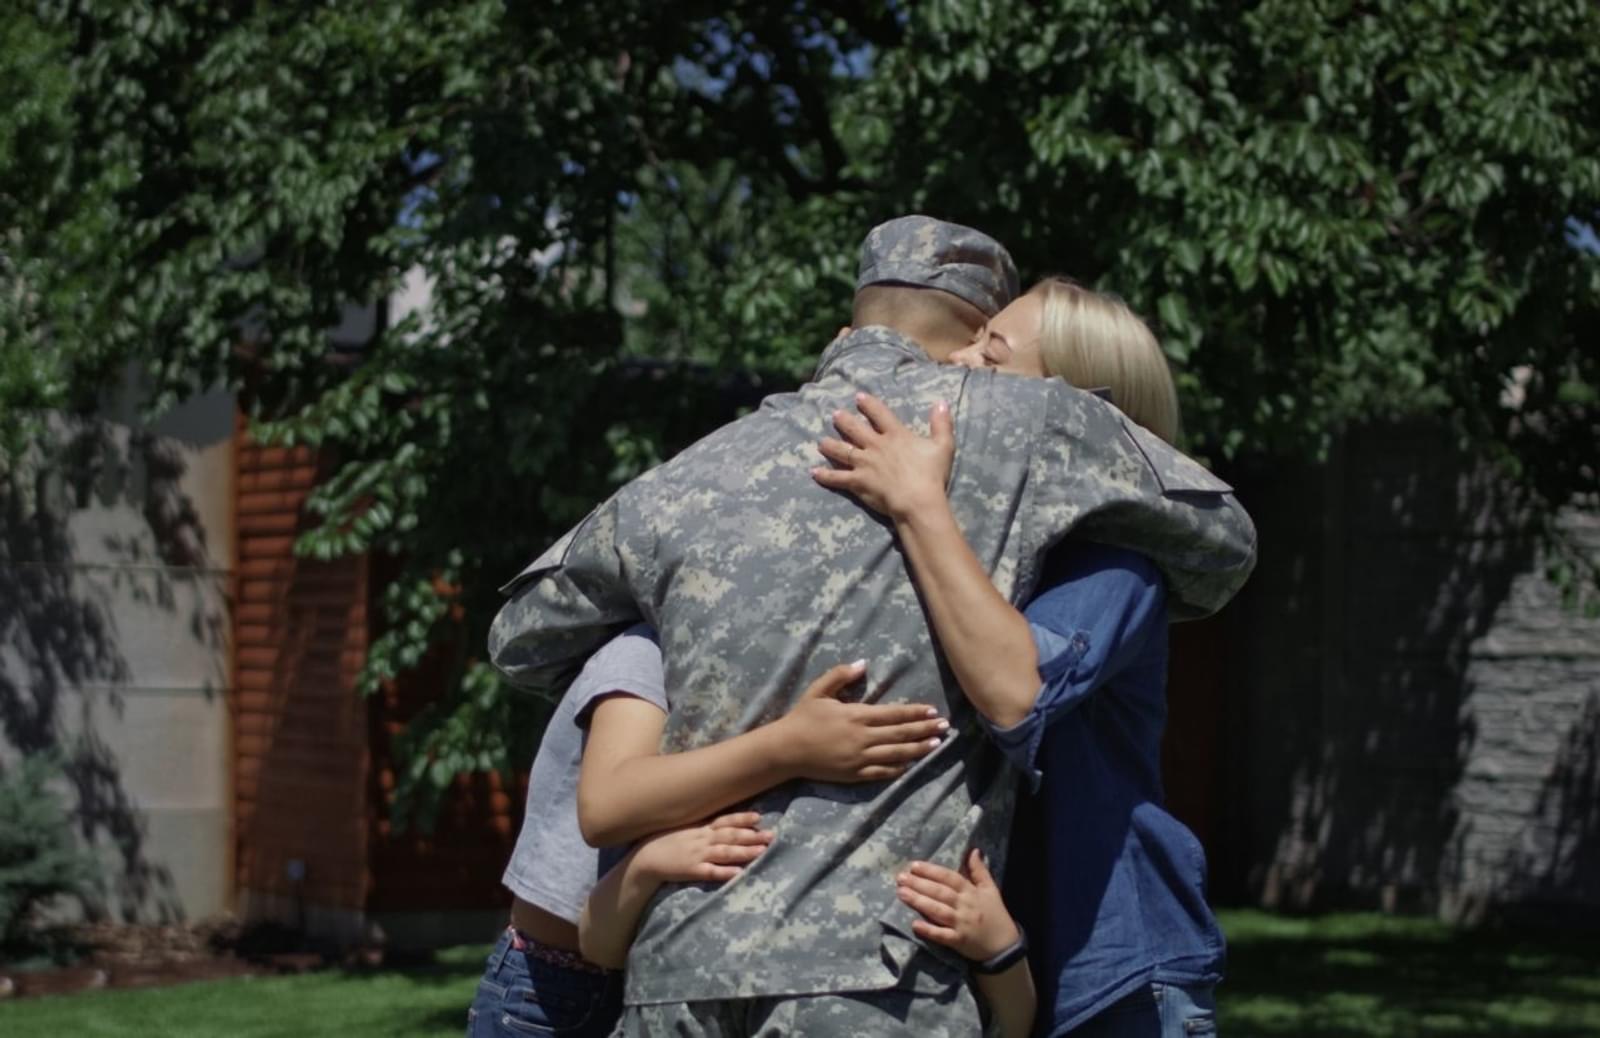 Man in military uniform hugging woman and child